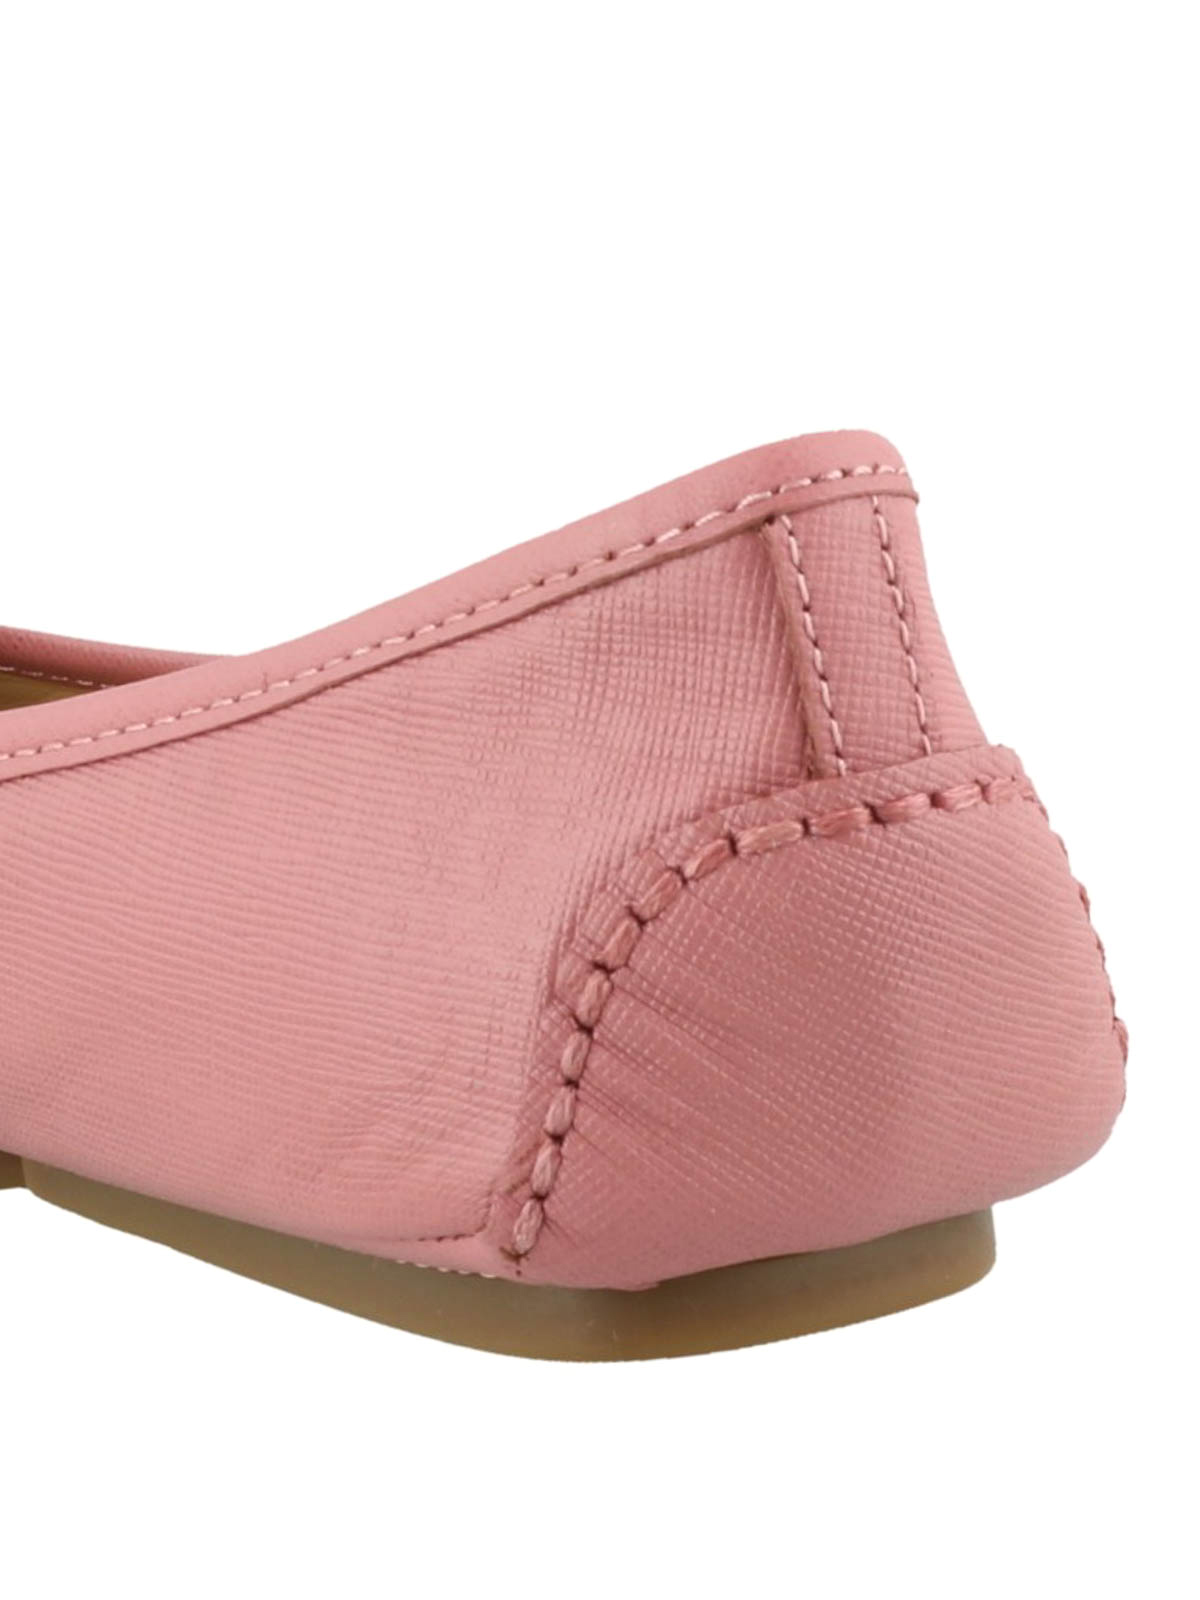 pink leather flat shoes